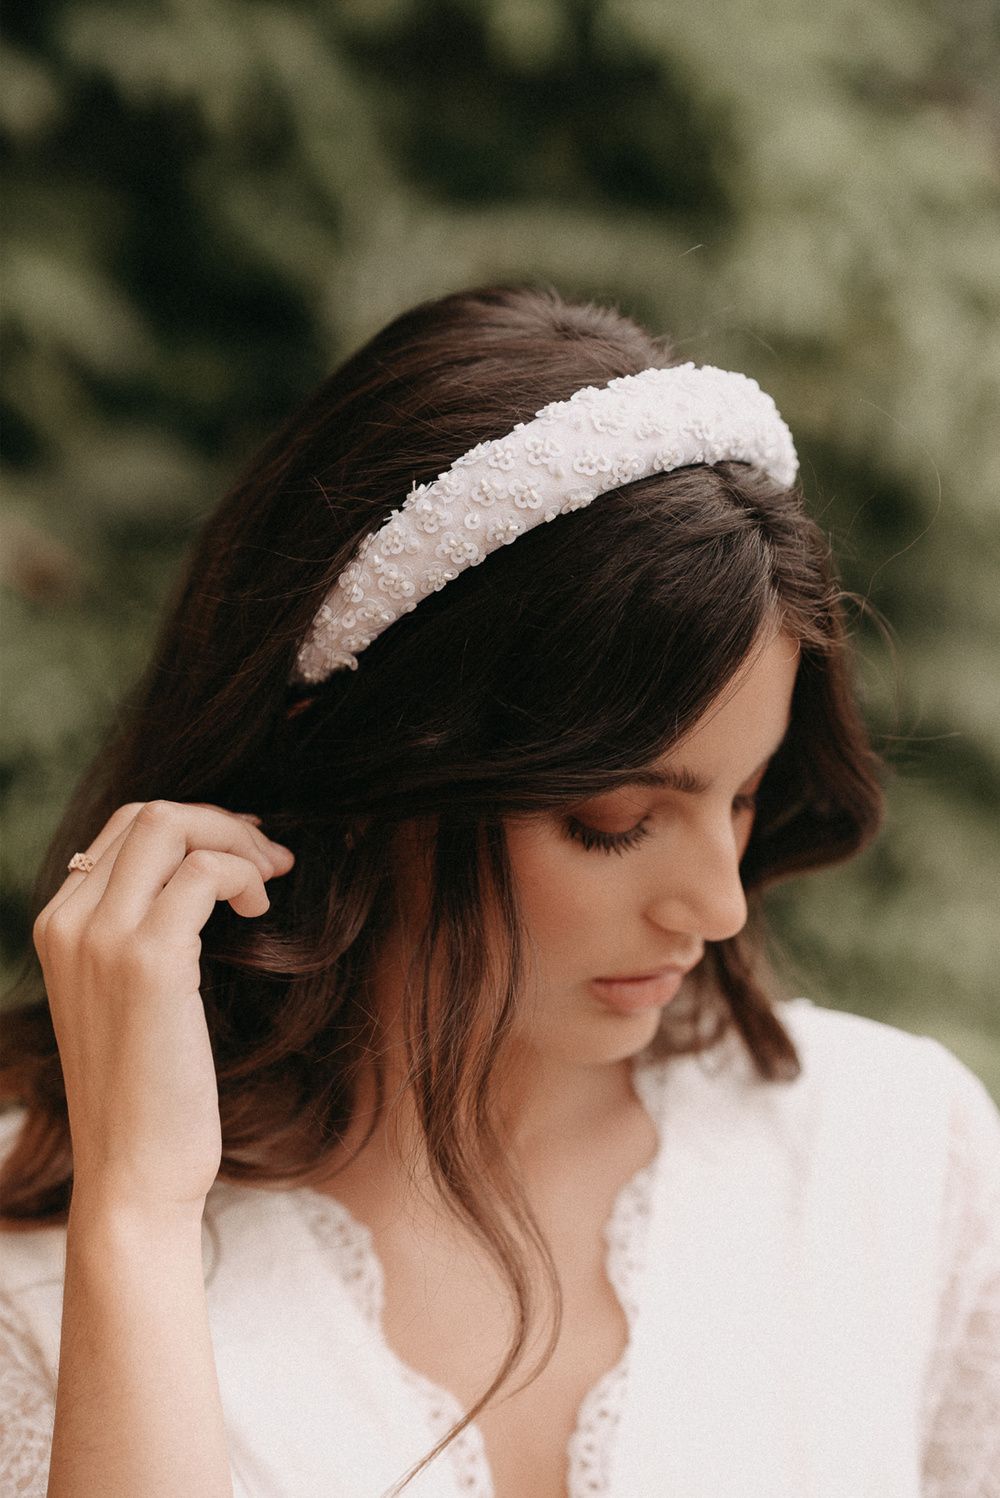 5 wedding headpiece trends you'll see in 2022